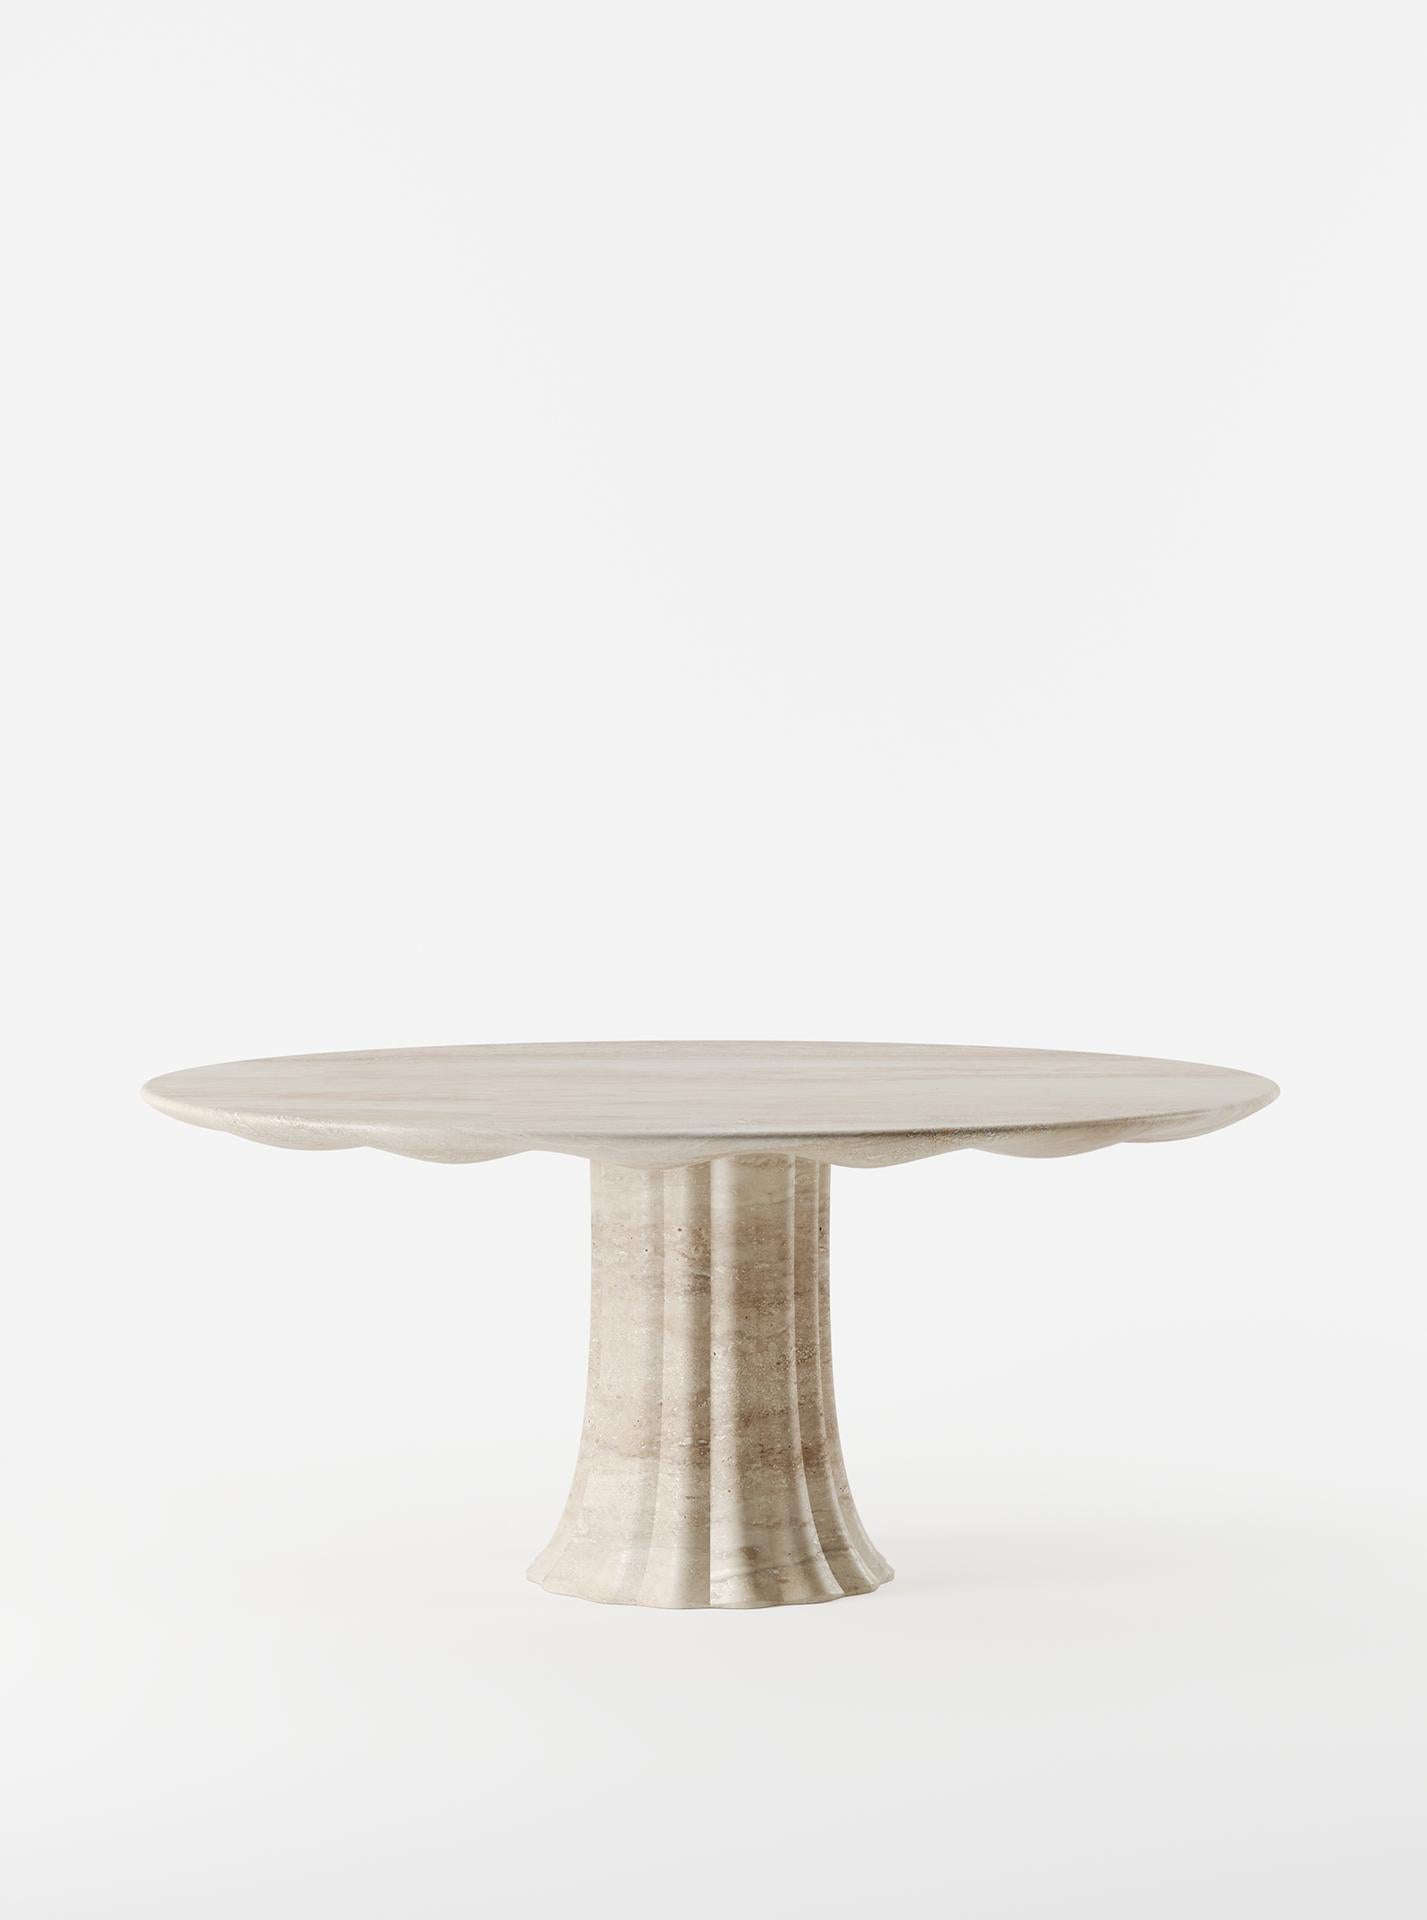 Distinguished for his signature sense of nostalgia, designer Yaniv Chen recalls the influences behind the Drapery Table—a one-of-a-kind piece crafted in Italy from a single block of Travertine. First inspired by a room photographed by Nan Goldin in